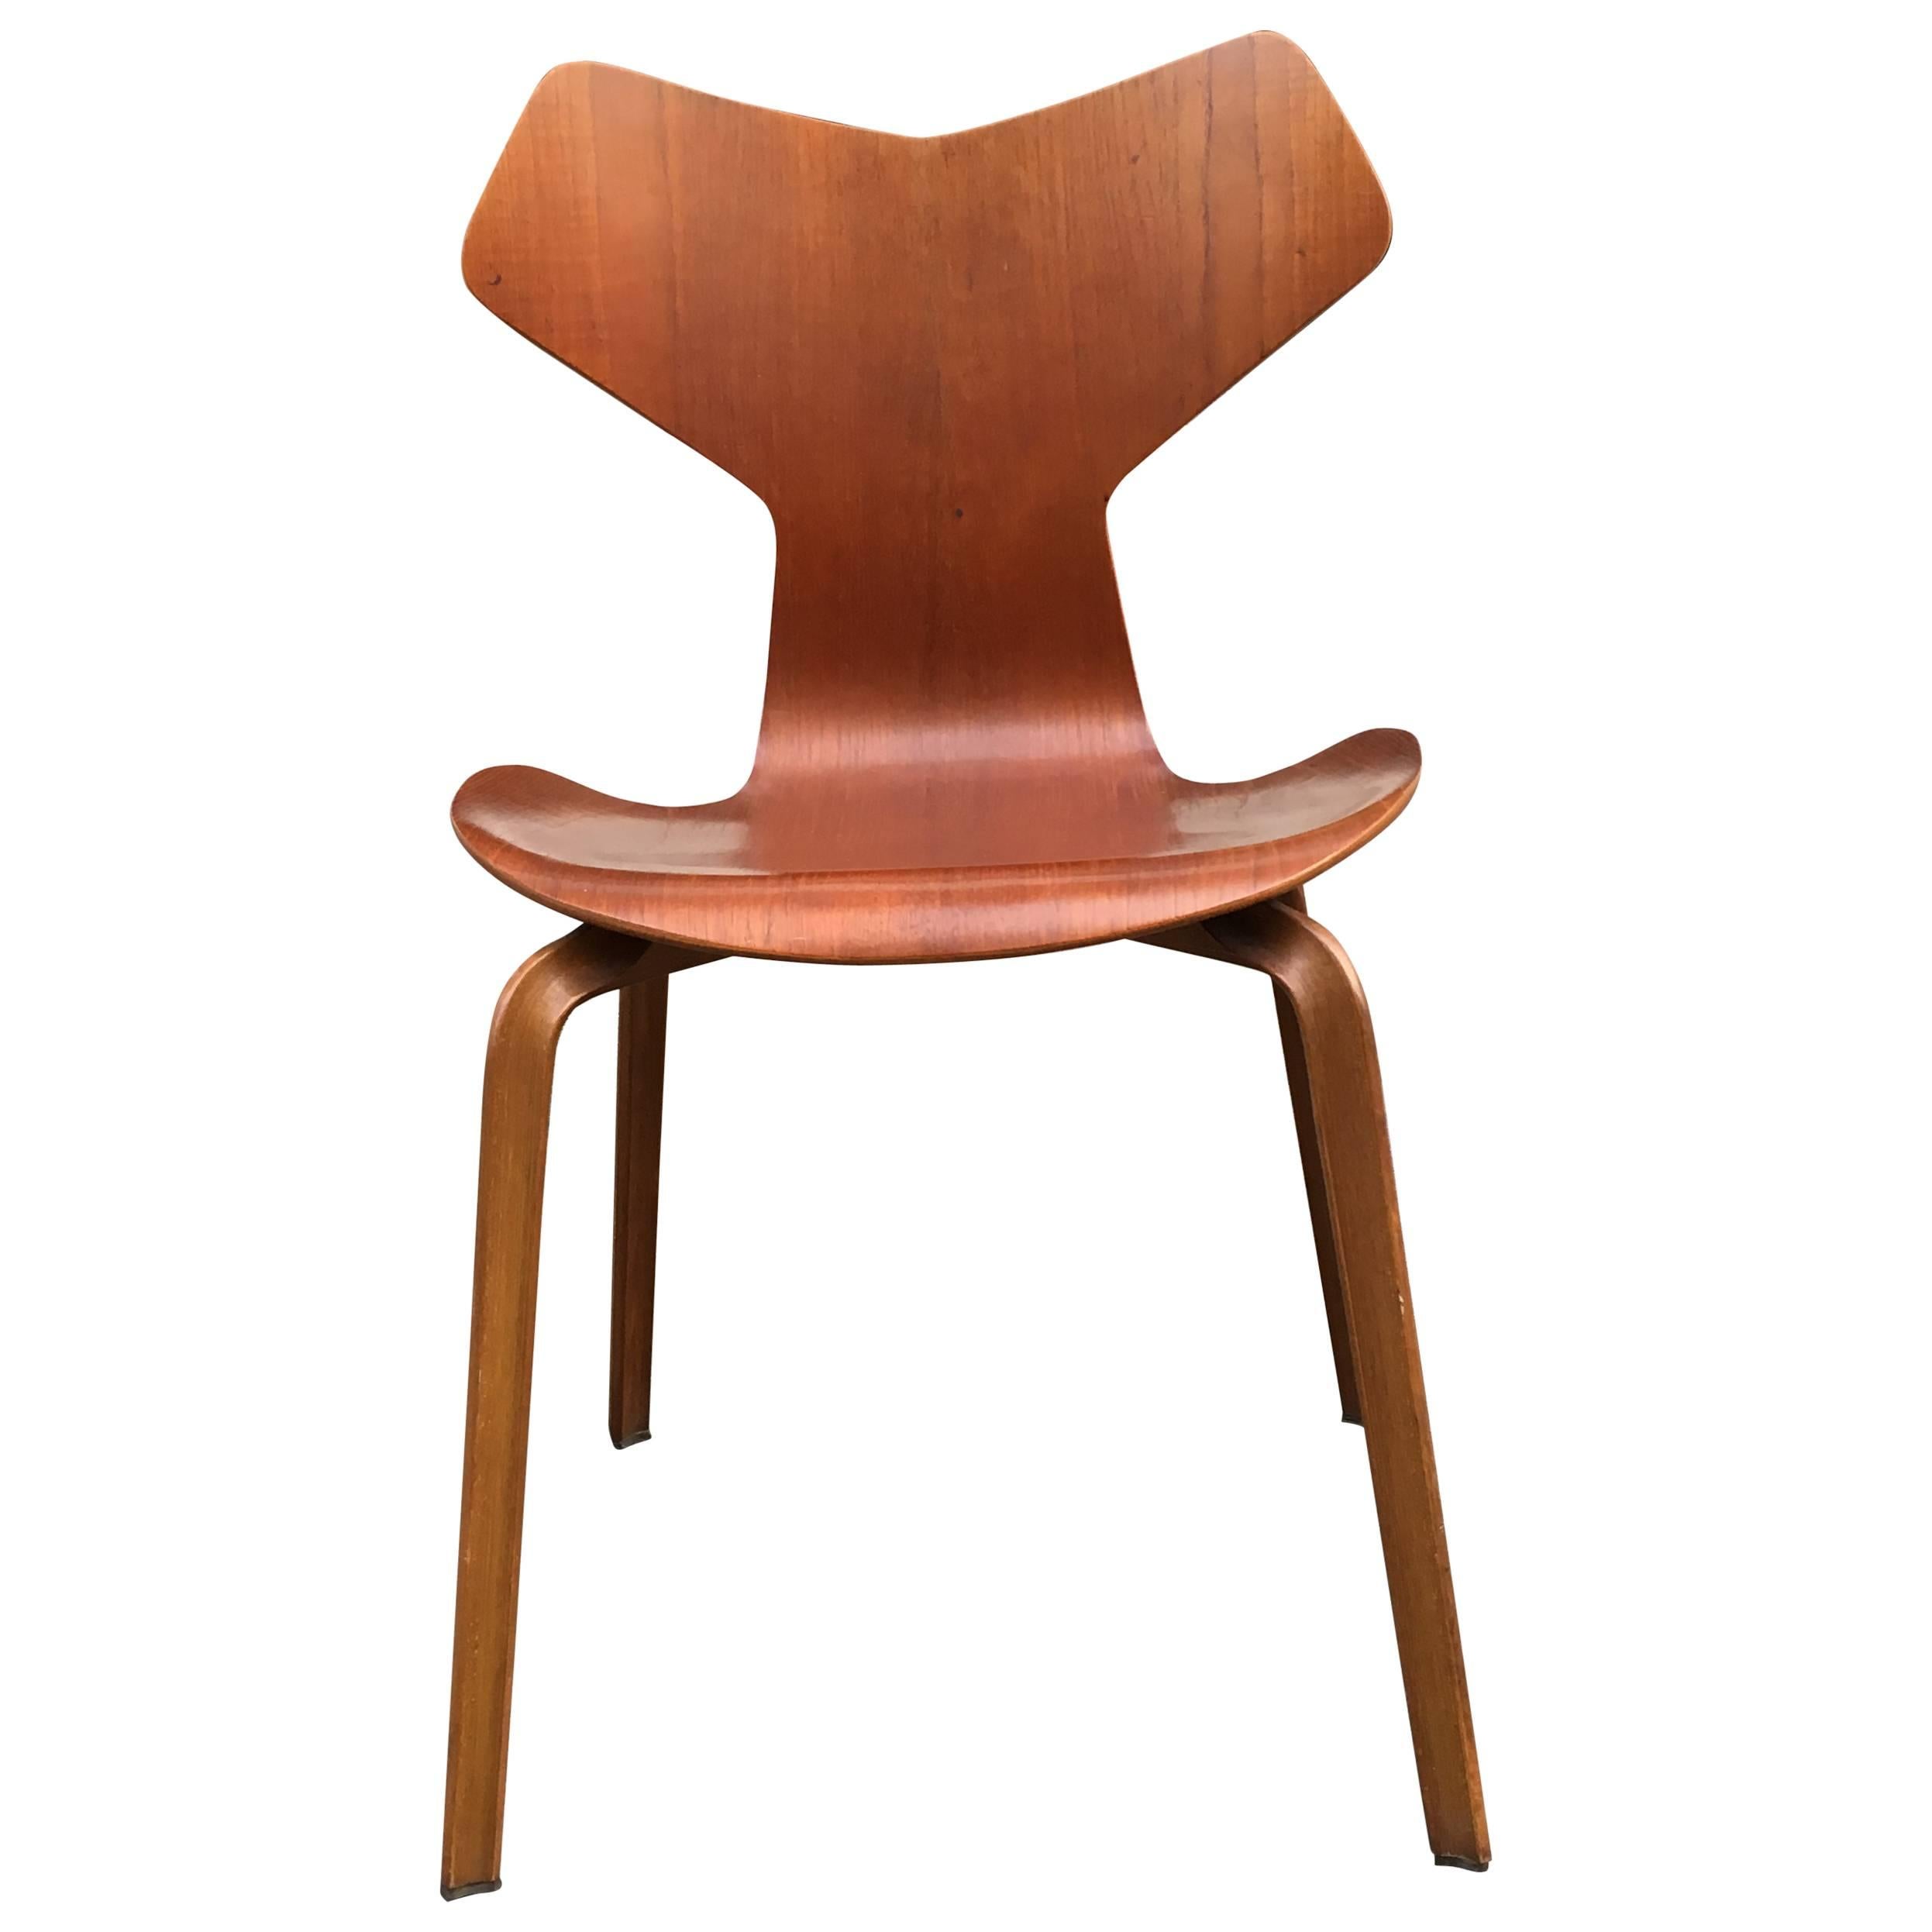 Rare First Edition Grand Prix Chair by Arne Jacobsen for Fritz Hansen For Sale